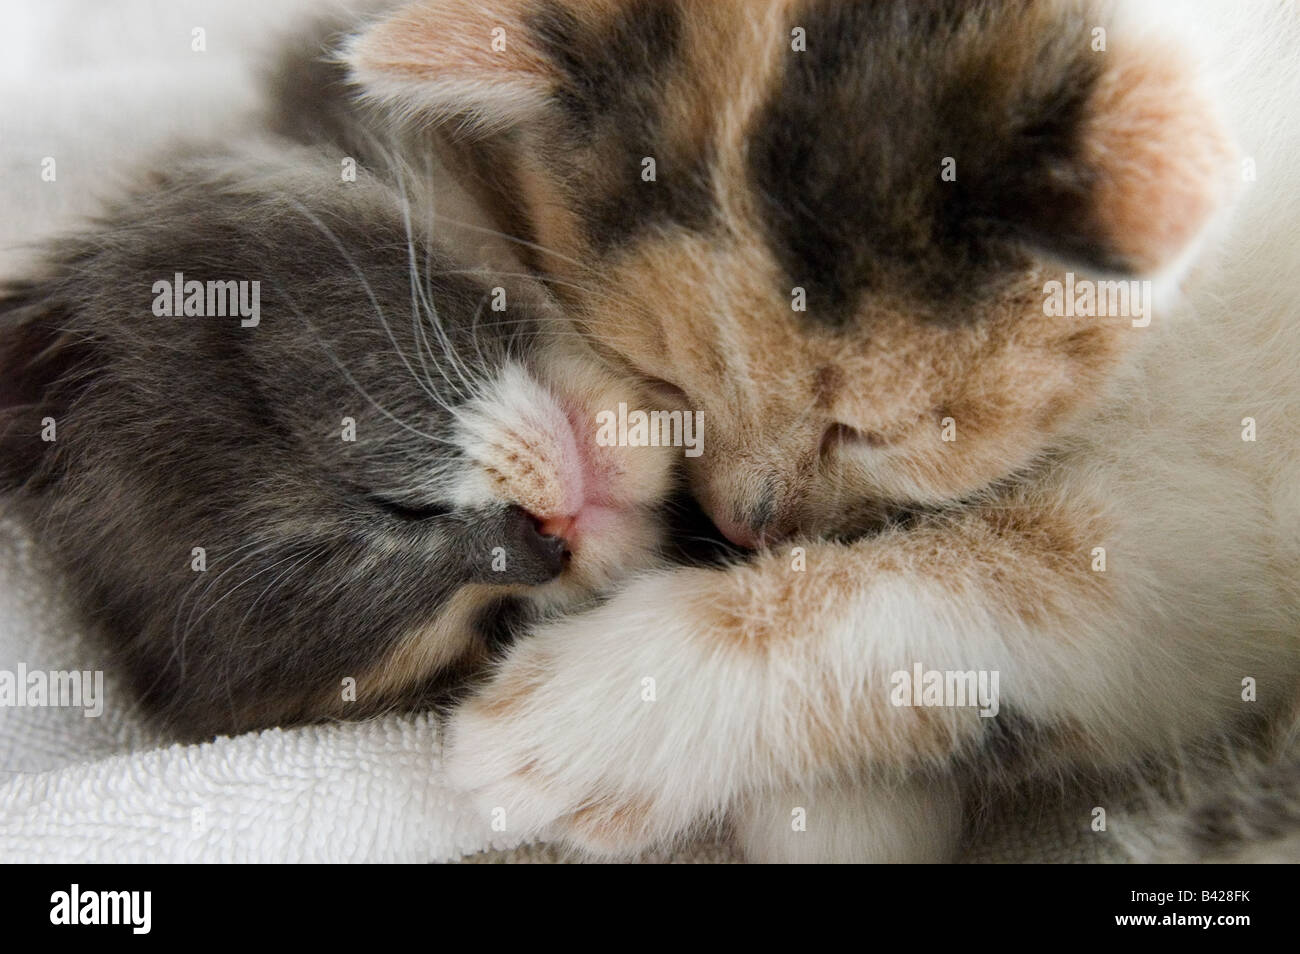 Close-up of two young kittens cuddling together. They are 35 days or 5 weeks old. One is calico and the other is grey and white. Stock Photo